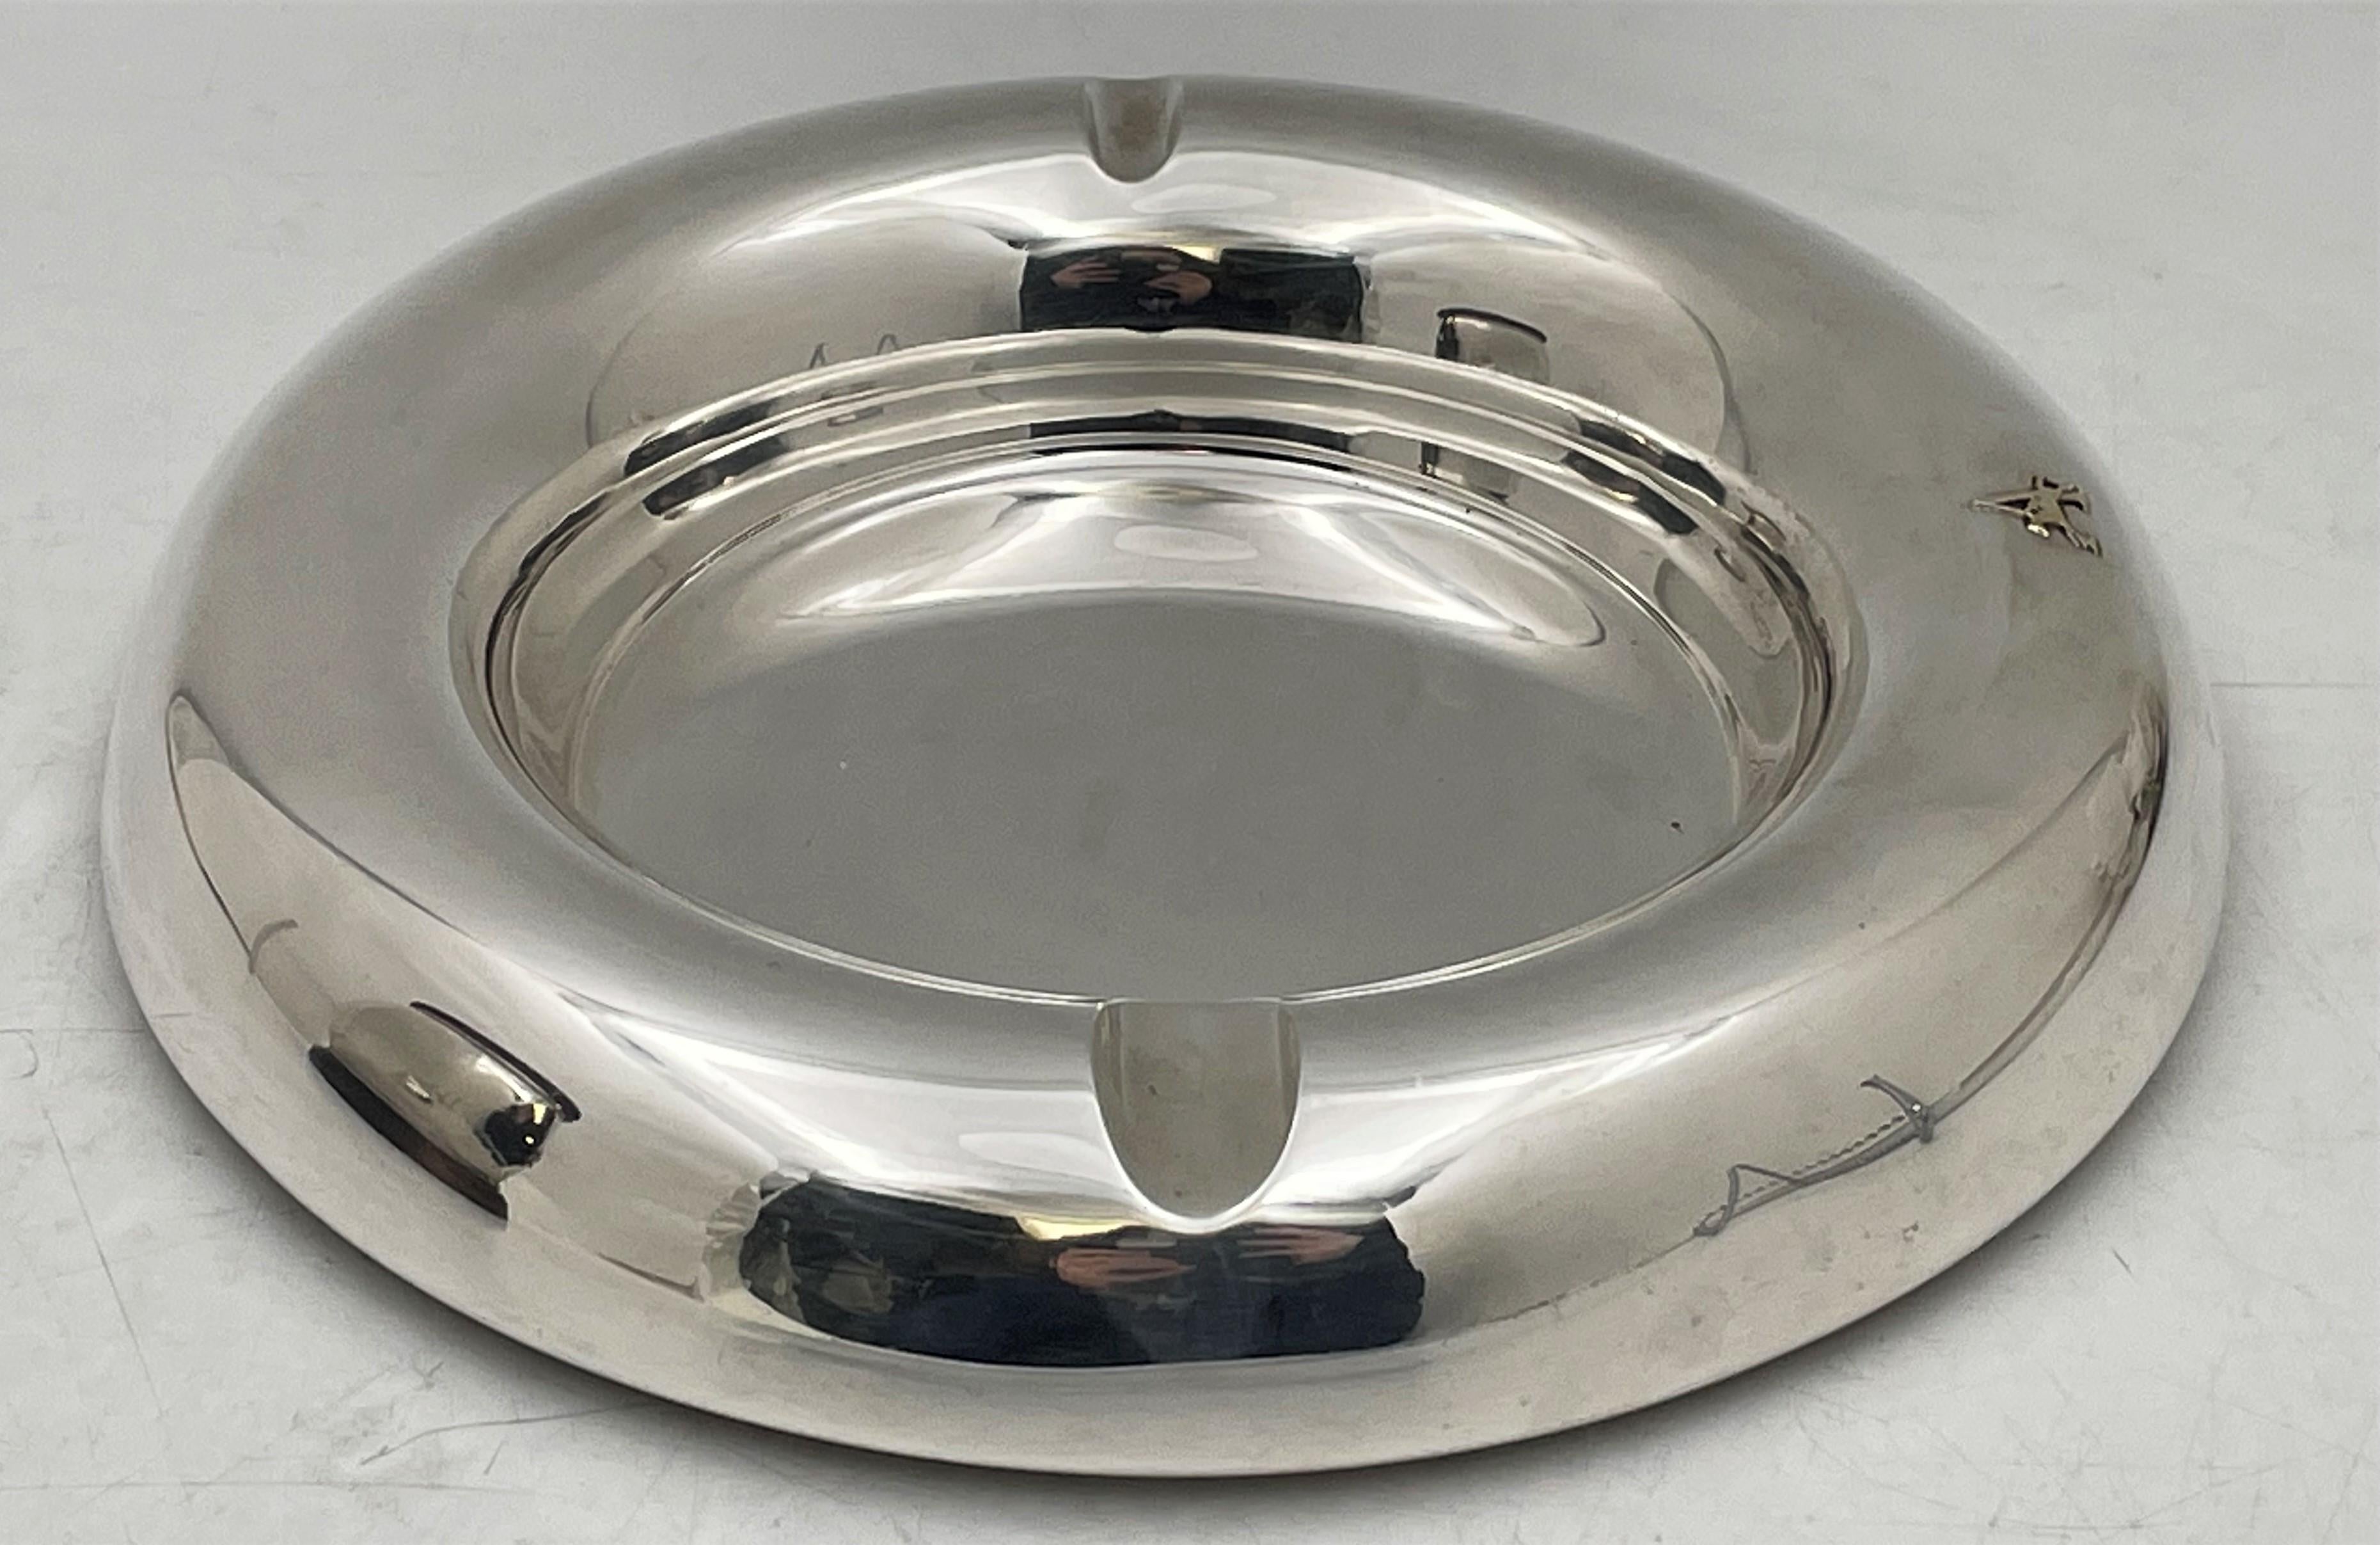 Fratelli Cacchione, Italian, sterling silver ashtray with an applied gold motif showcasing the letter A with a horse, in Mid-Century Modern style with a beautiful, geometric design, measuring 7 7/8'' in diameter by 1 3/8'' in height, weighs 12.6